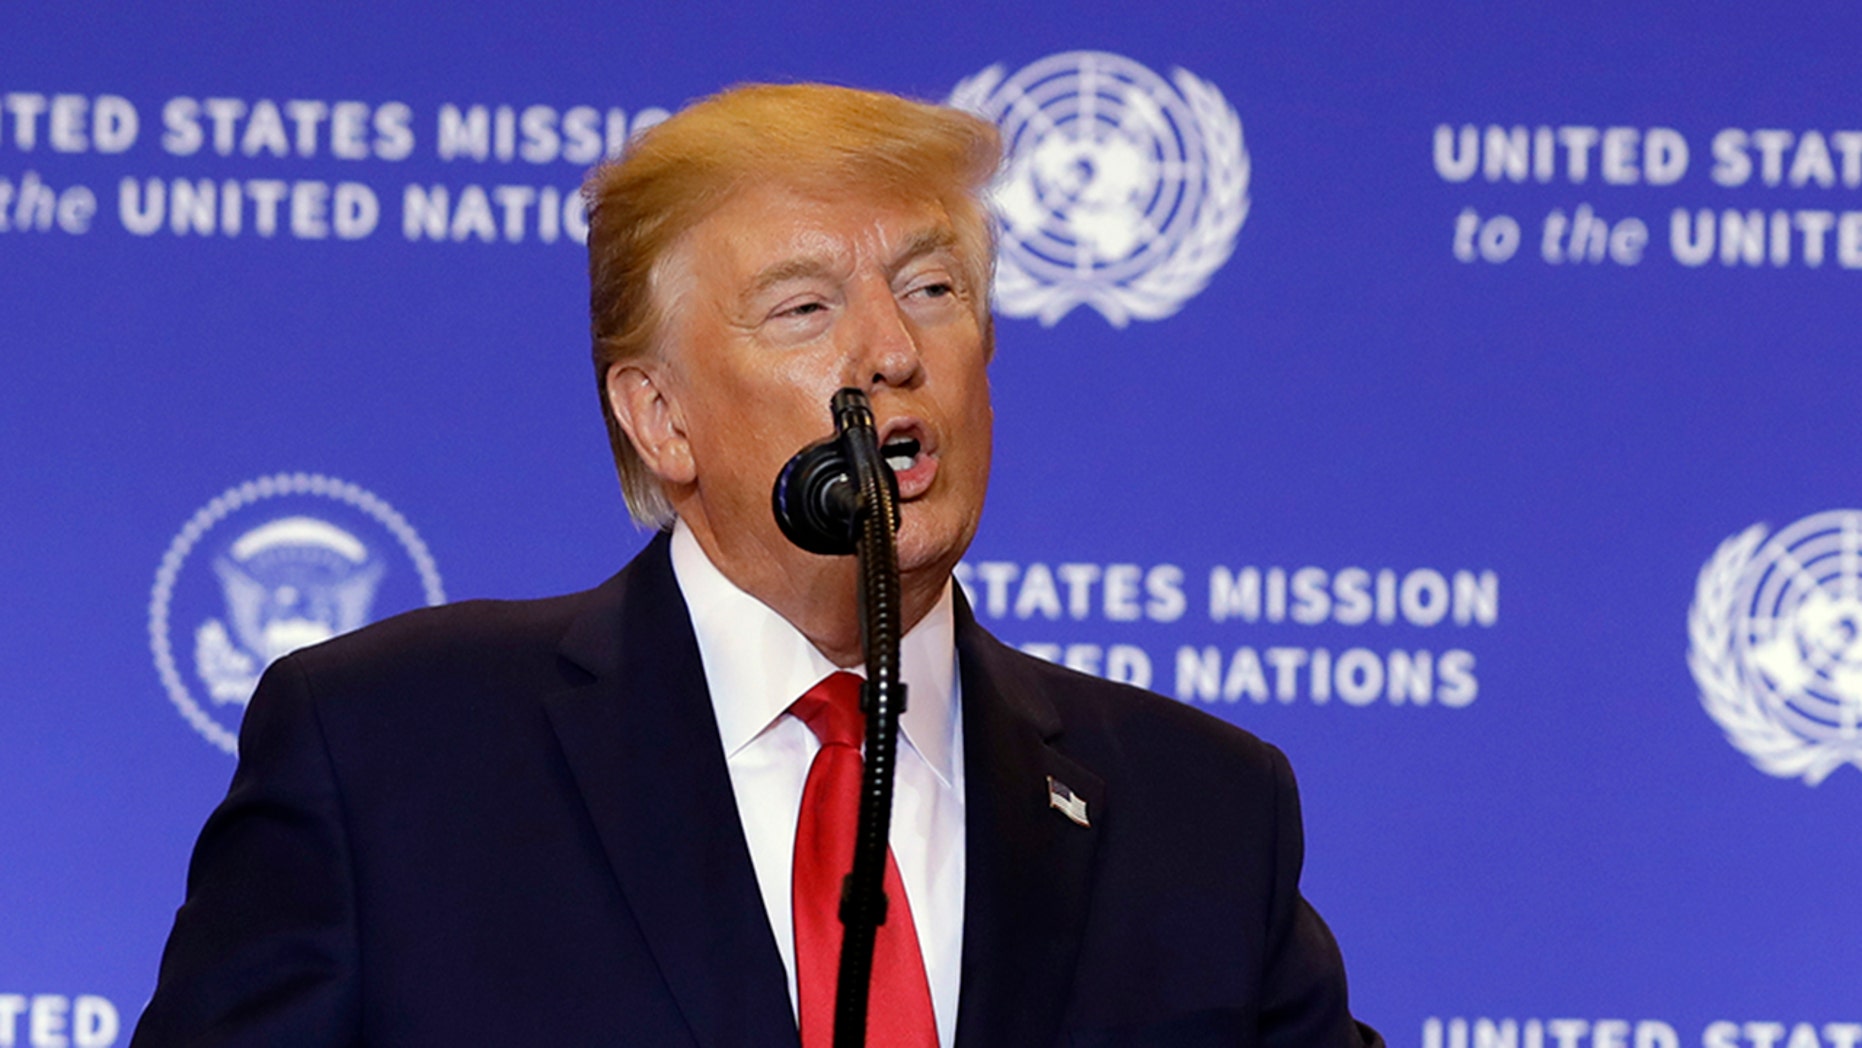 President Donald Trump speaks during a news conference at the InterContinental Barclay New York hotel during the United Nations General Assembly, Wednesday, Sept. 25, 2019, in New York.(AP Photo/Evan Vucci)